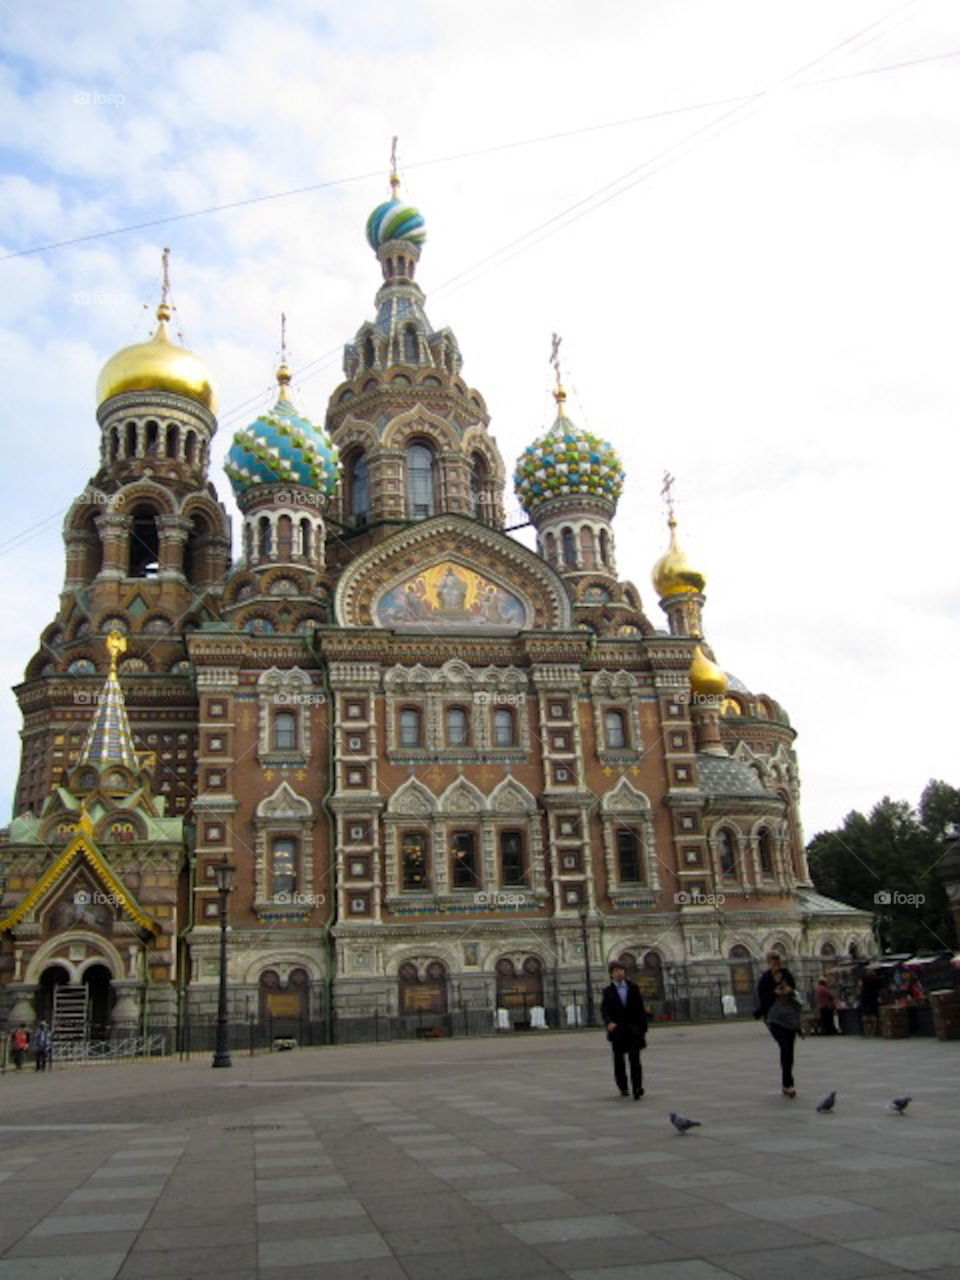 Church of our savior on spilled blood 